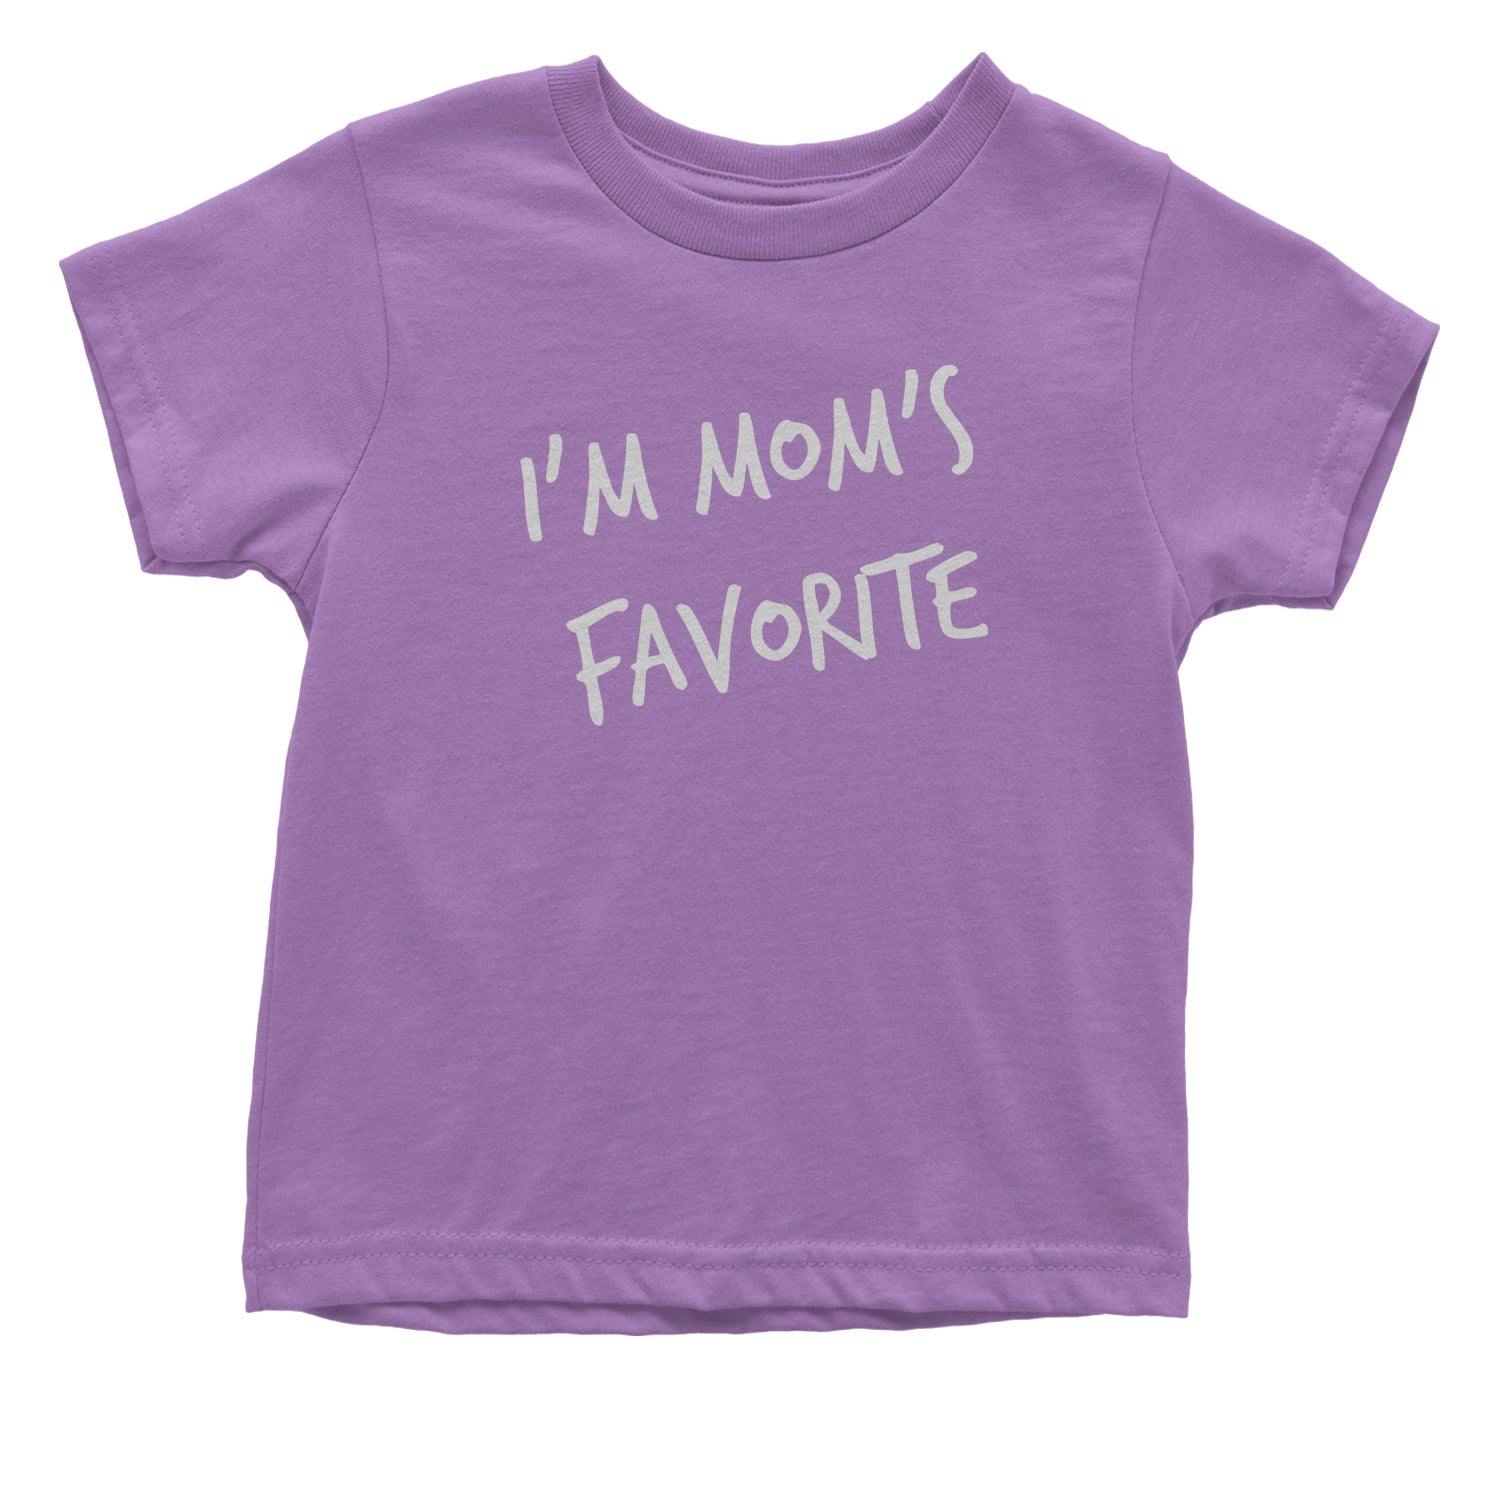 I'm Mom's Favorite Infant One-Piece Romper Bodysuit and Toddler T-shirt bear, buck, mama, papa by Expression Tees